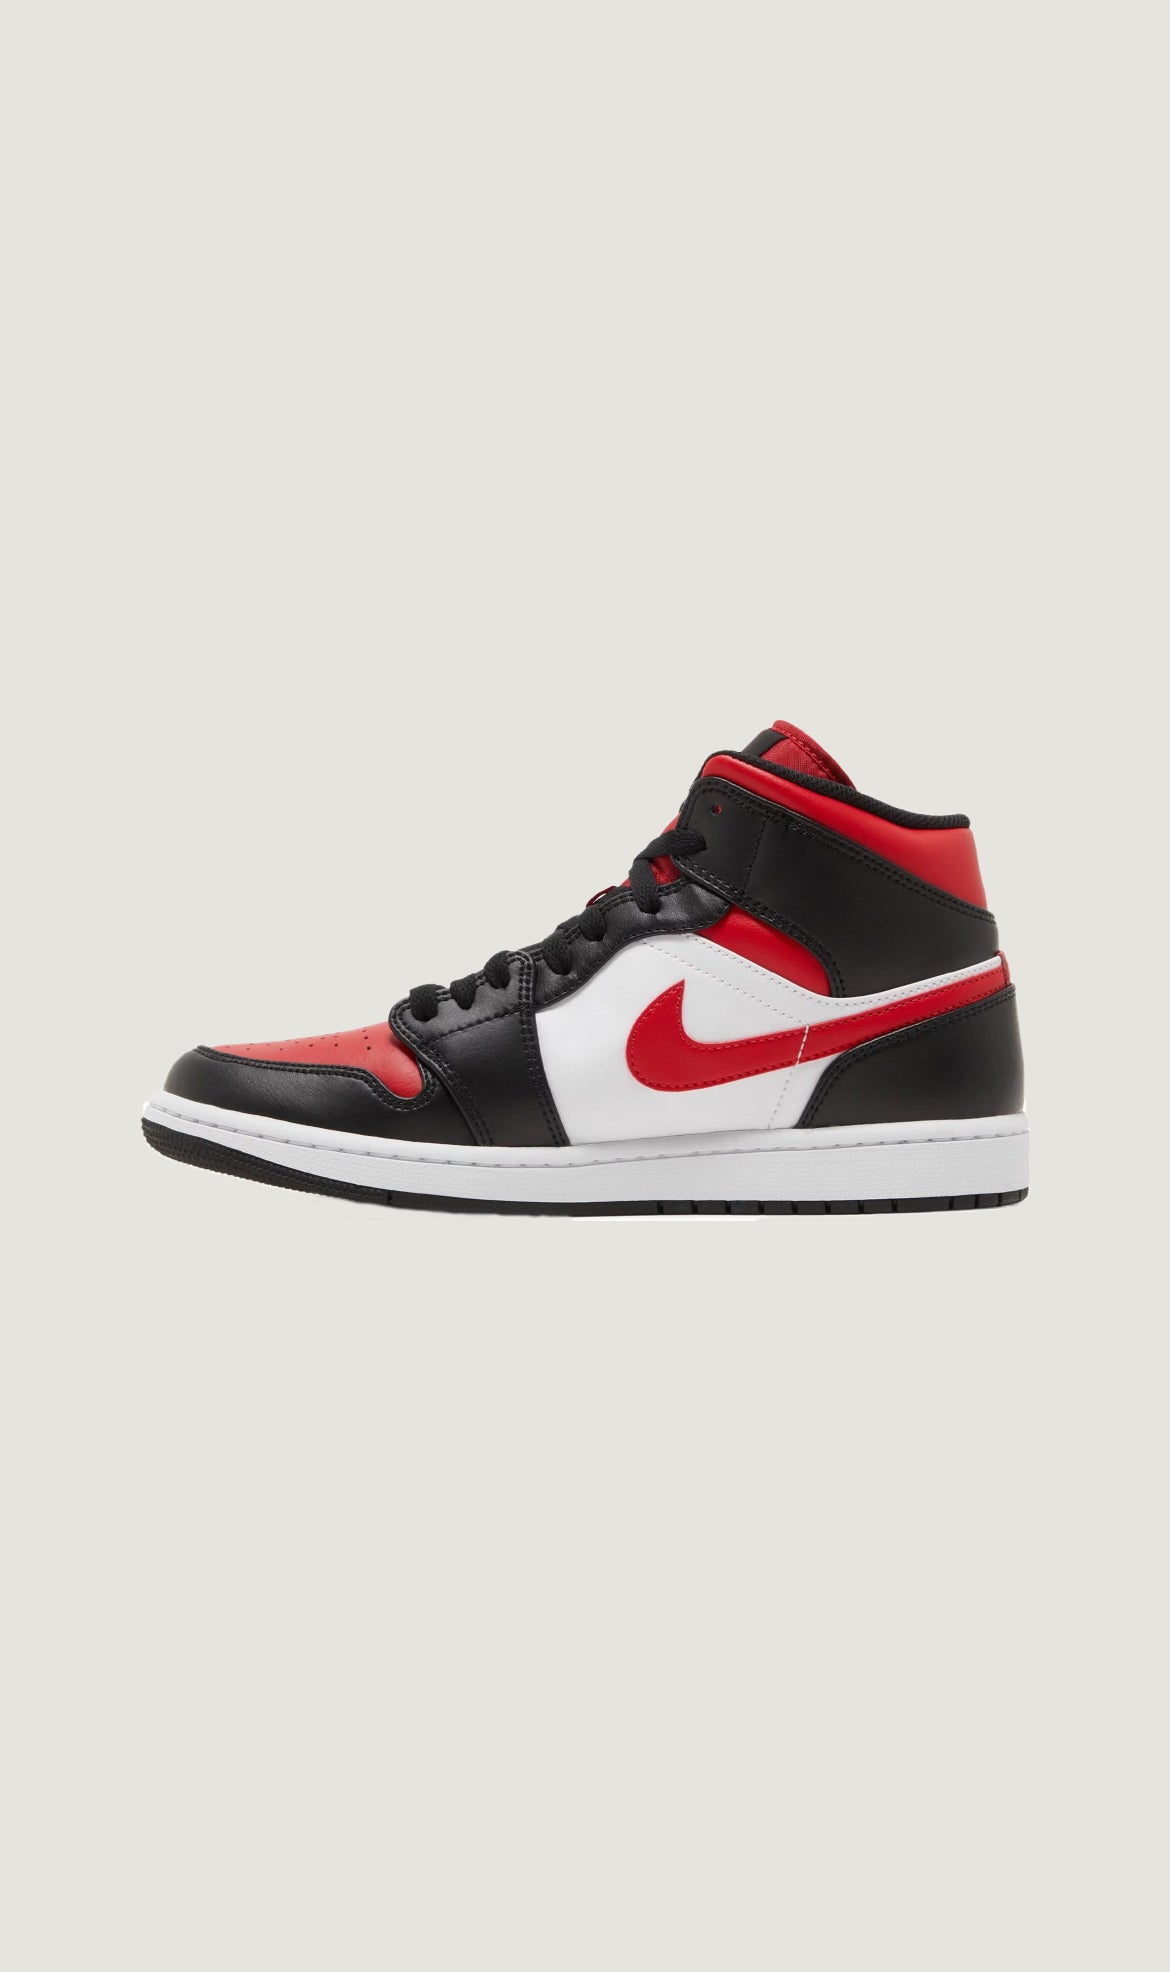 Load image into Gallery viewer, AIR JORDAN 1 MID - BRED TOE
